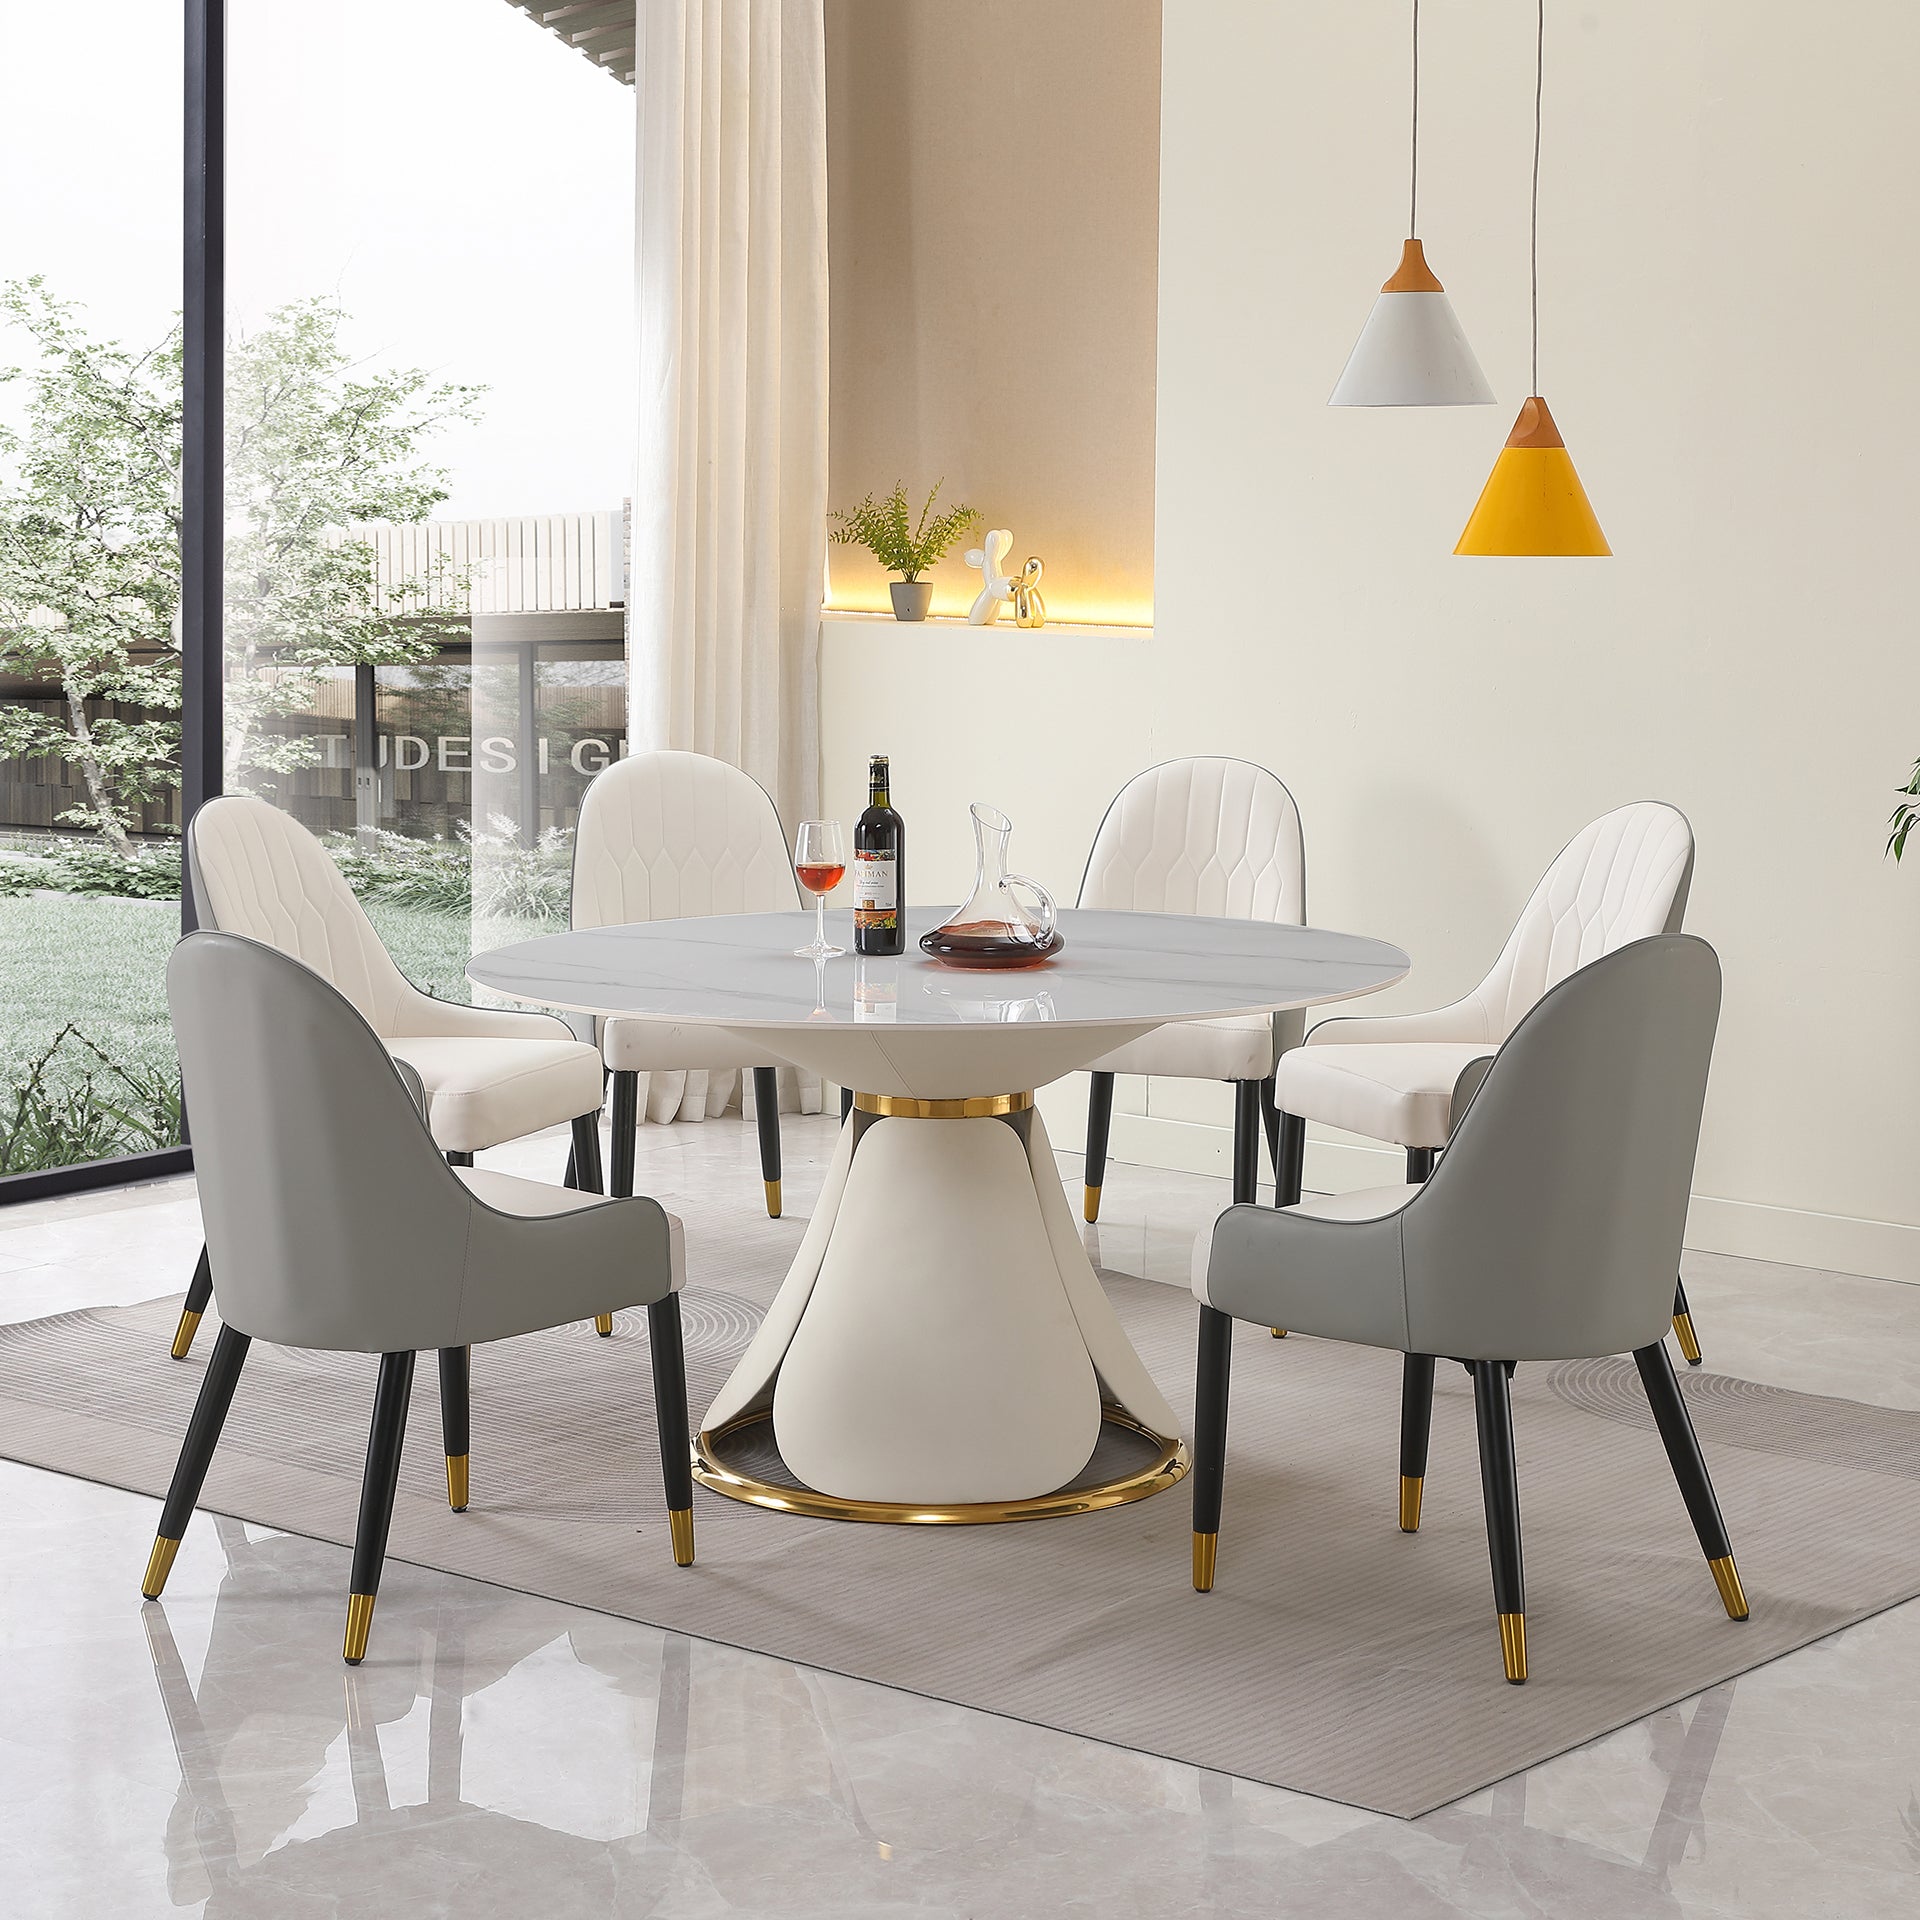 Montary® 53“ Modern Sintered Stone Round Dining Table with Stainless Steel Base with 6 Pcs Chairs